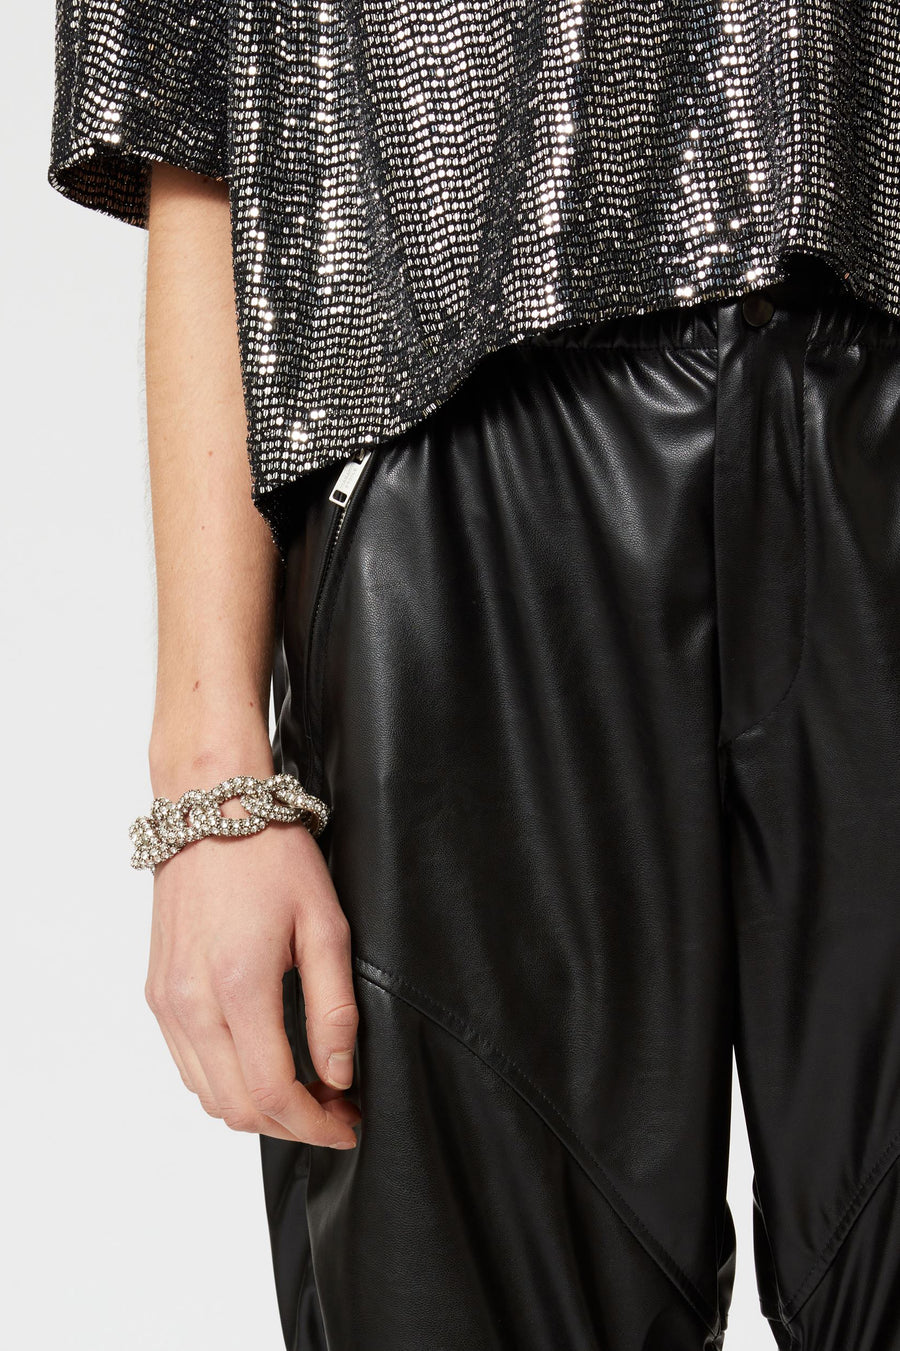 Armband Funky in SilberIsabel Marant - Anita Hass